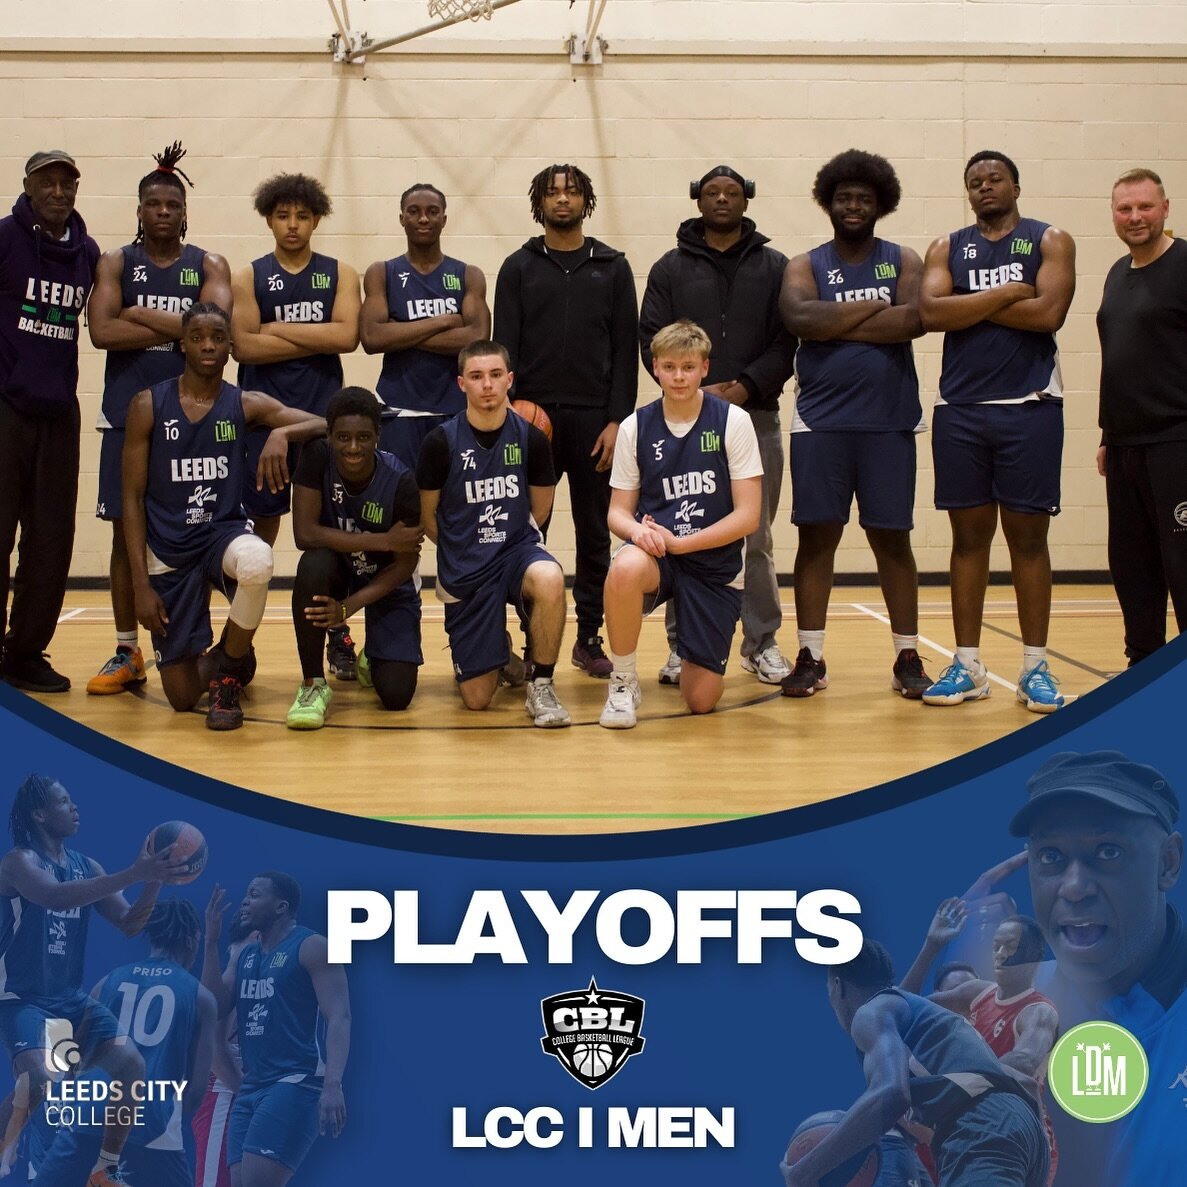 LCC 1 qualify for playoffs after finishing as runners up in the @academybasketball league tier 3 North 🏀

#basketballengland #ukbasketball #britishbasketball #collegebasketball #letsdomore #leedsbasketball #leedssport